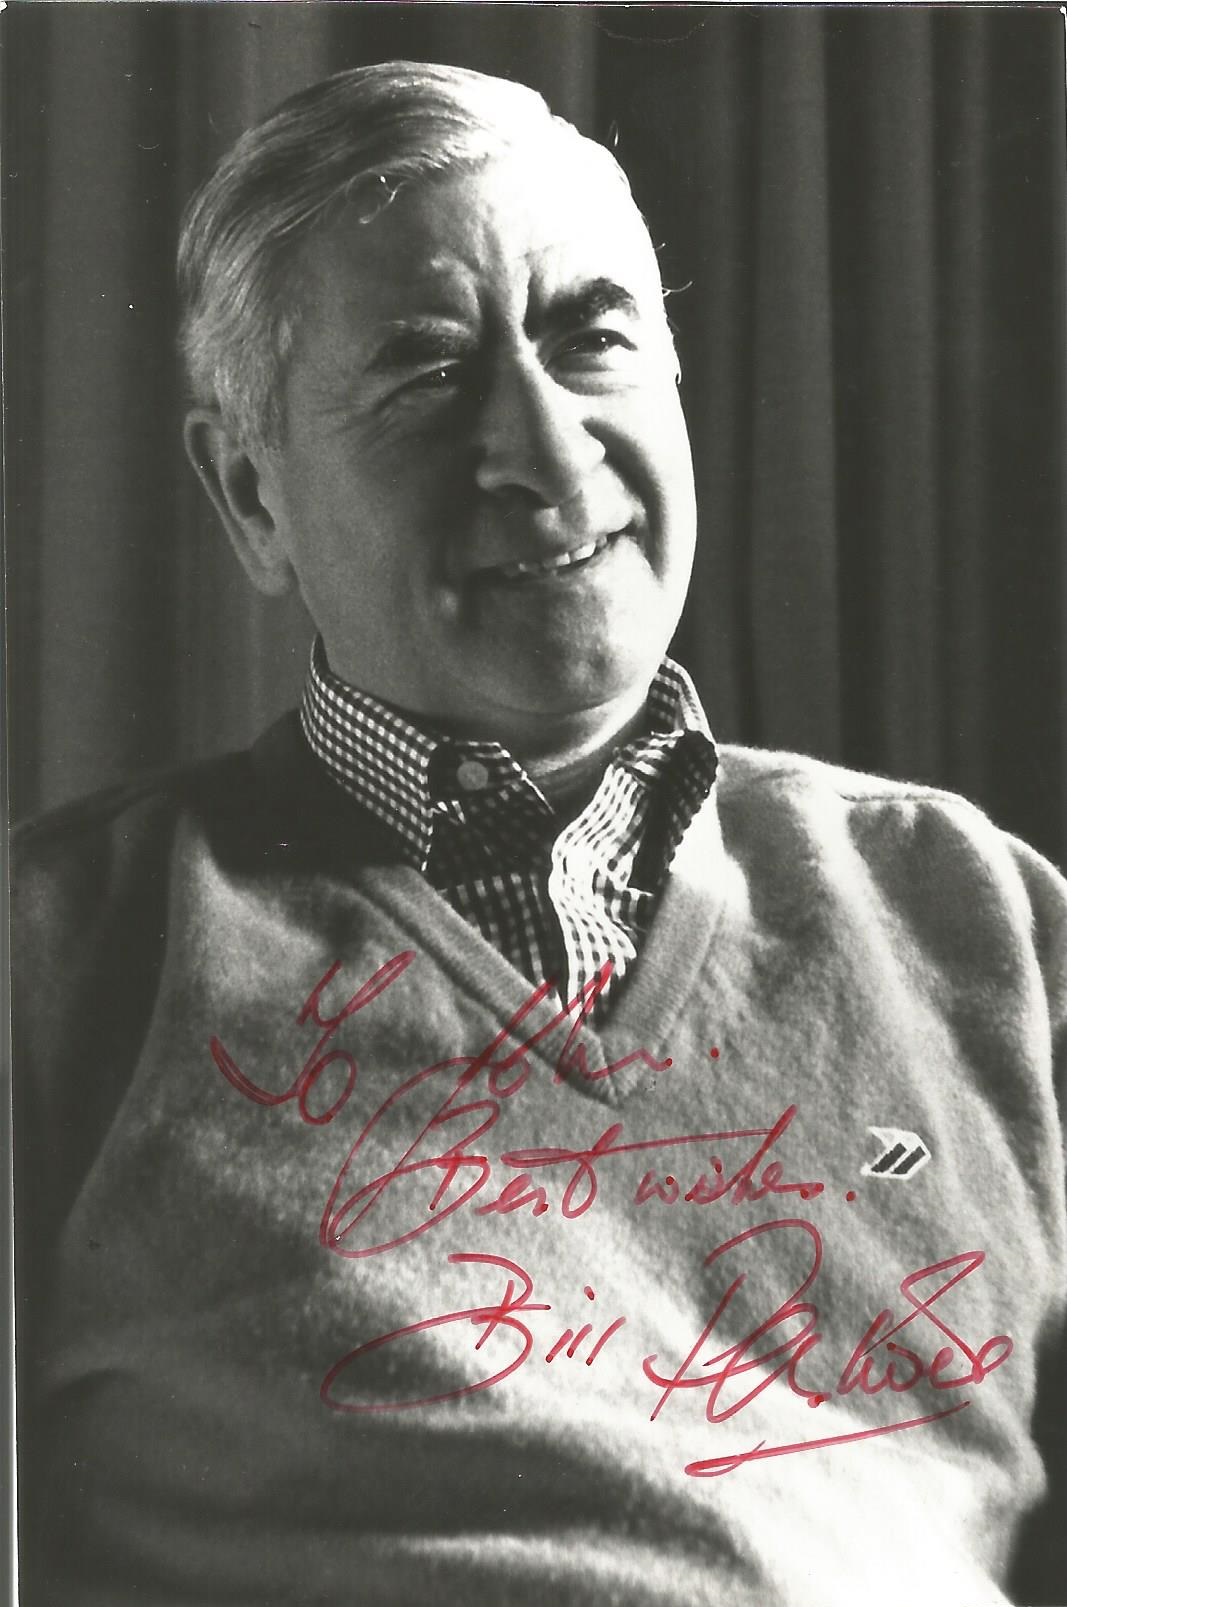 Bill Pertwee signed 6x4 b/w photo. (21 July 1926 - 27 May 2013) was an English comedy actor. He